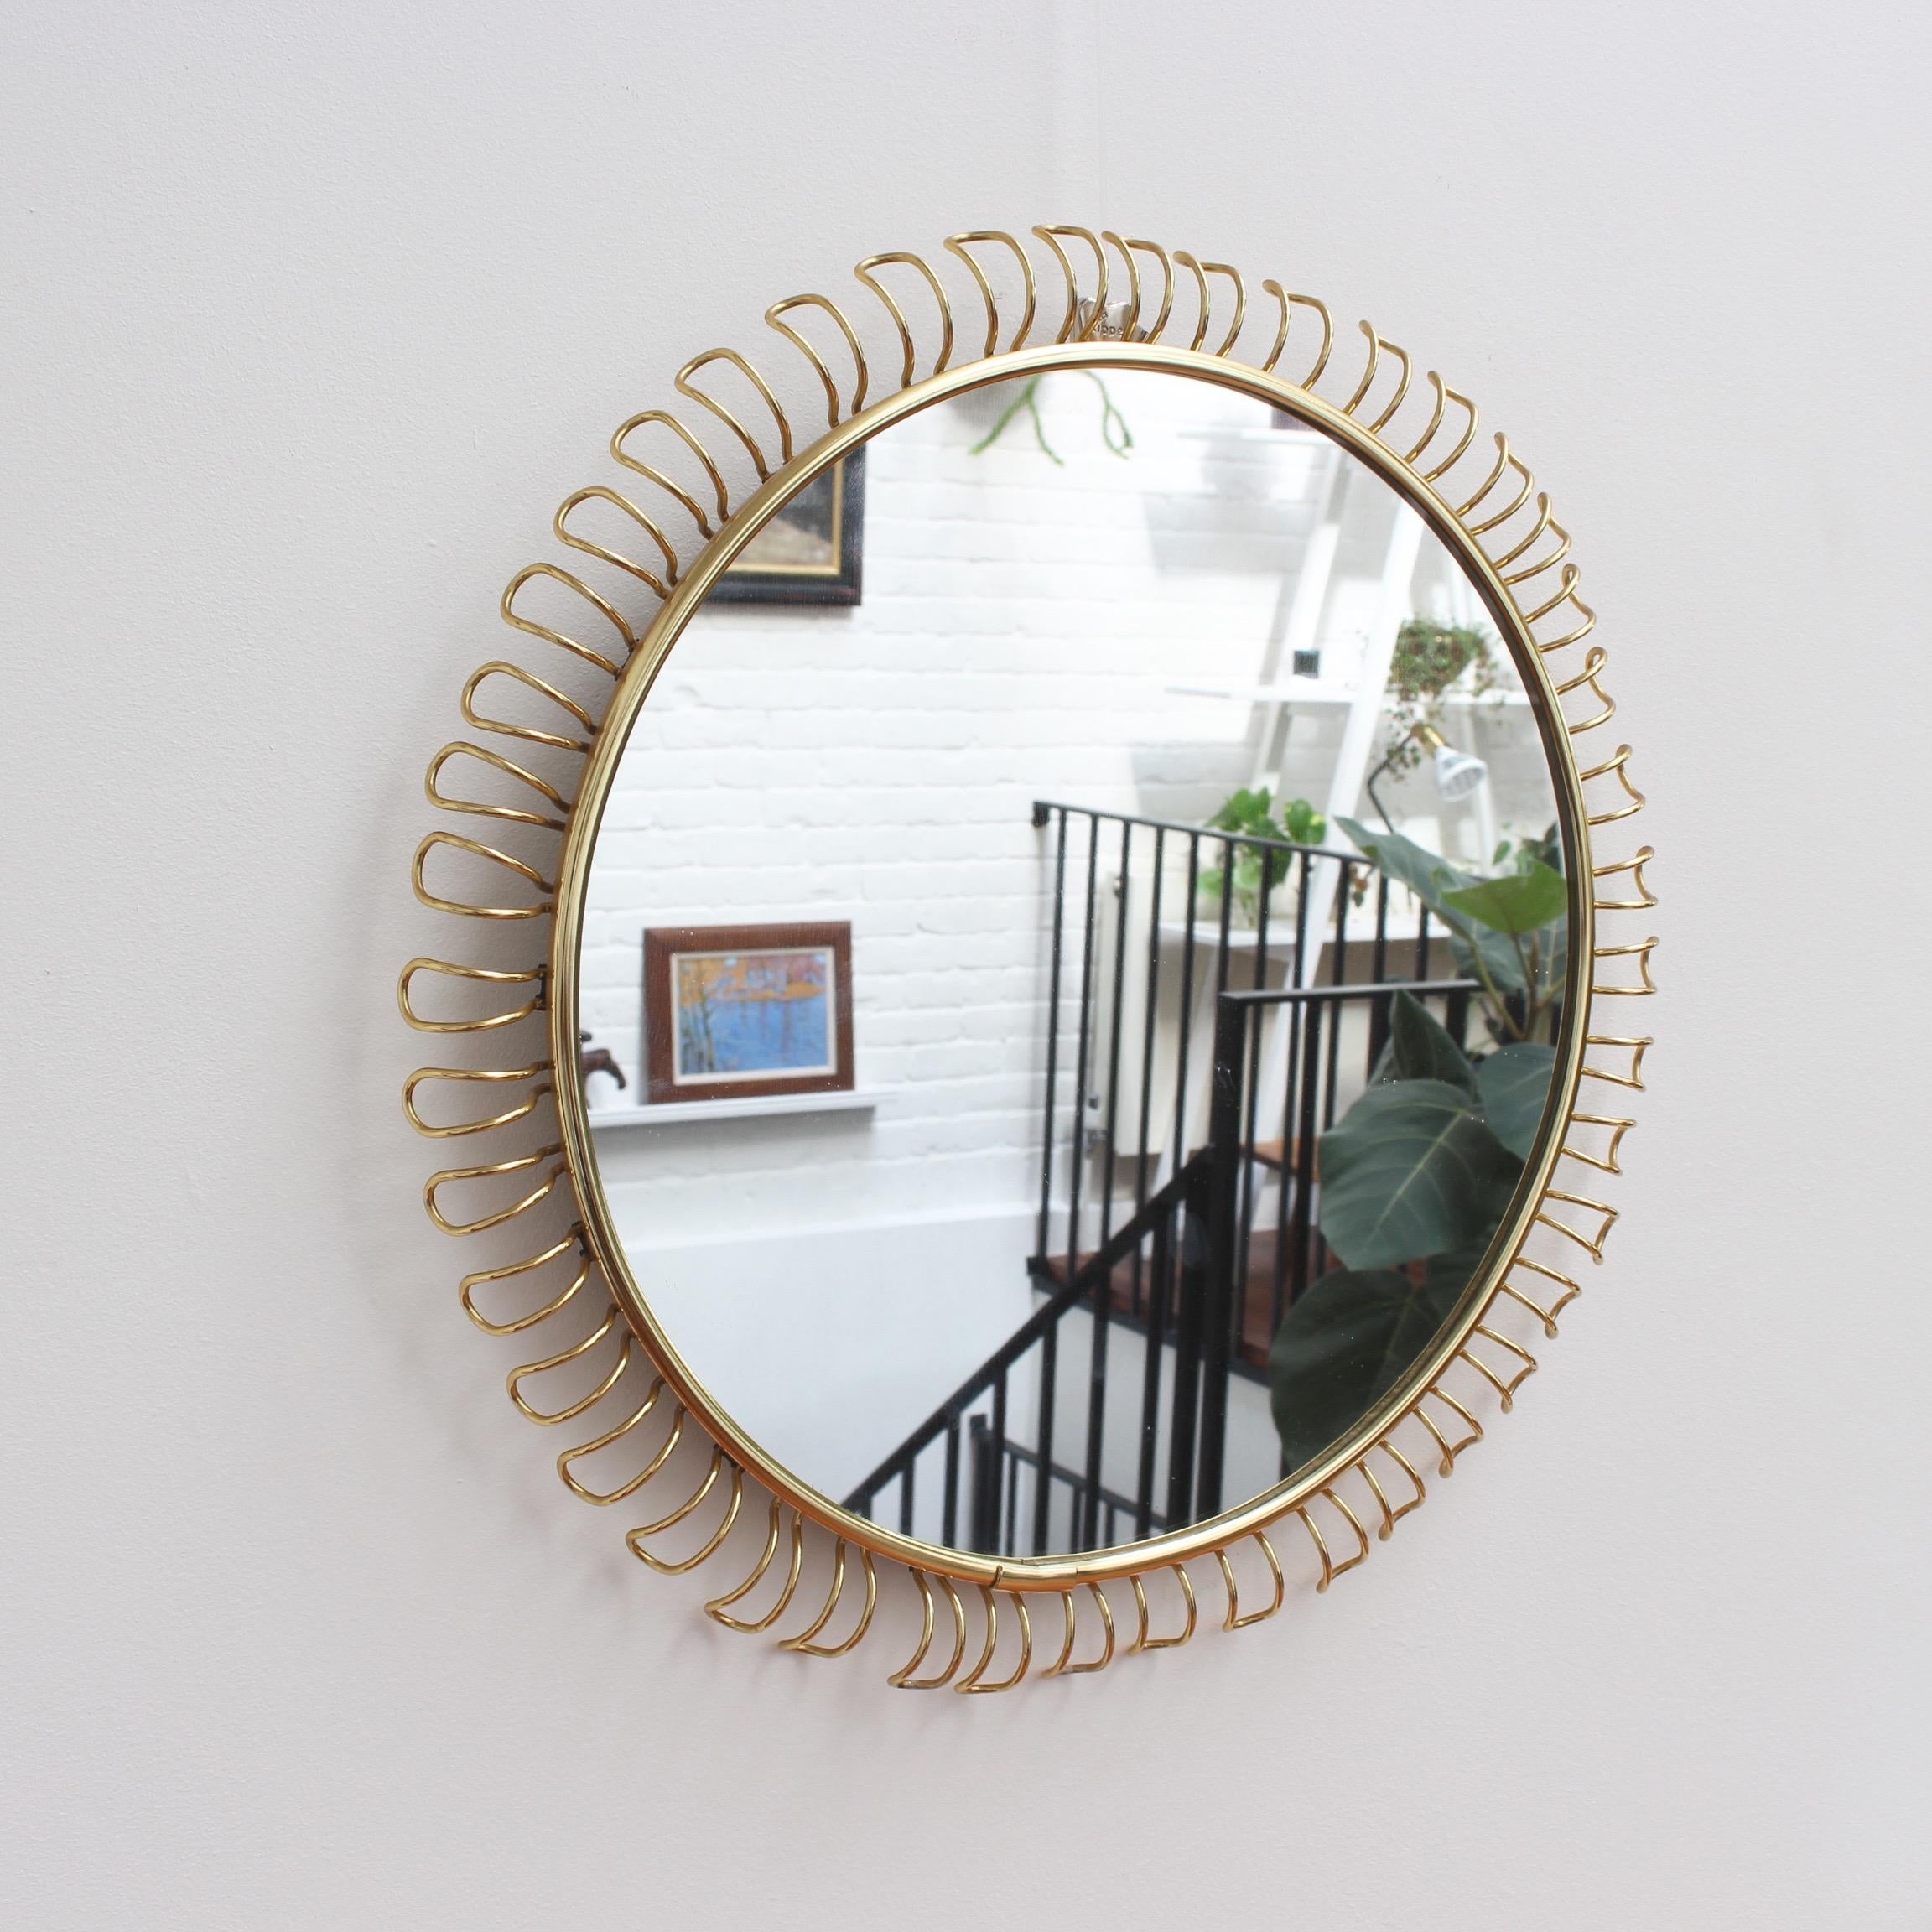 Round brass wall mirror with decorative corona-effect surround by Josef Frank (circa 1950s - 1960s). Original styling and elegant presence, this mirror is the centre of attention in any room. One of the decorative brass rectangular edging coils has